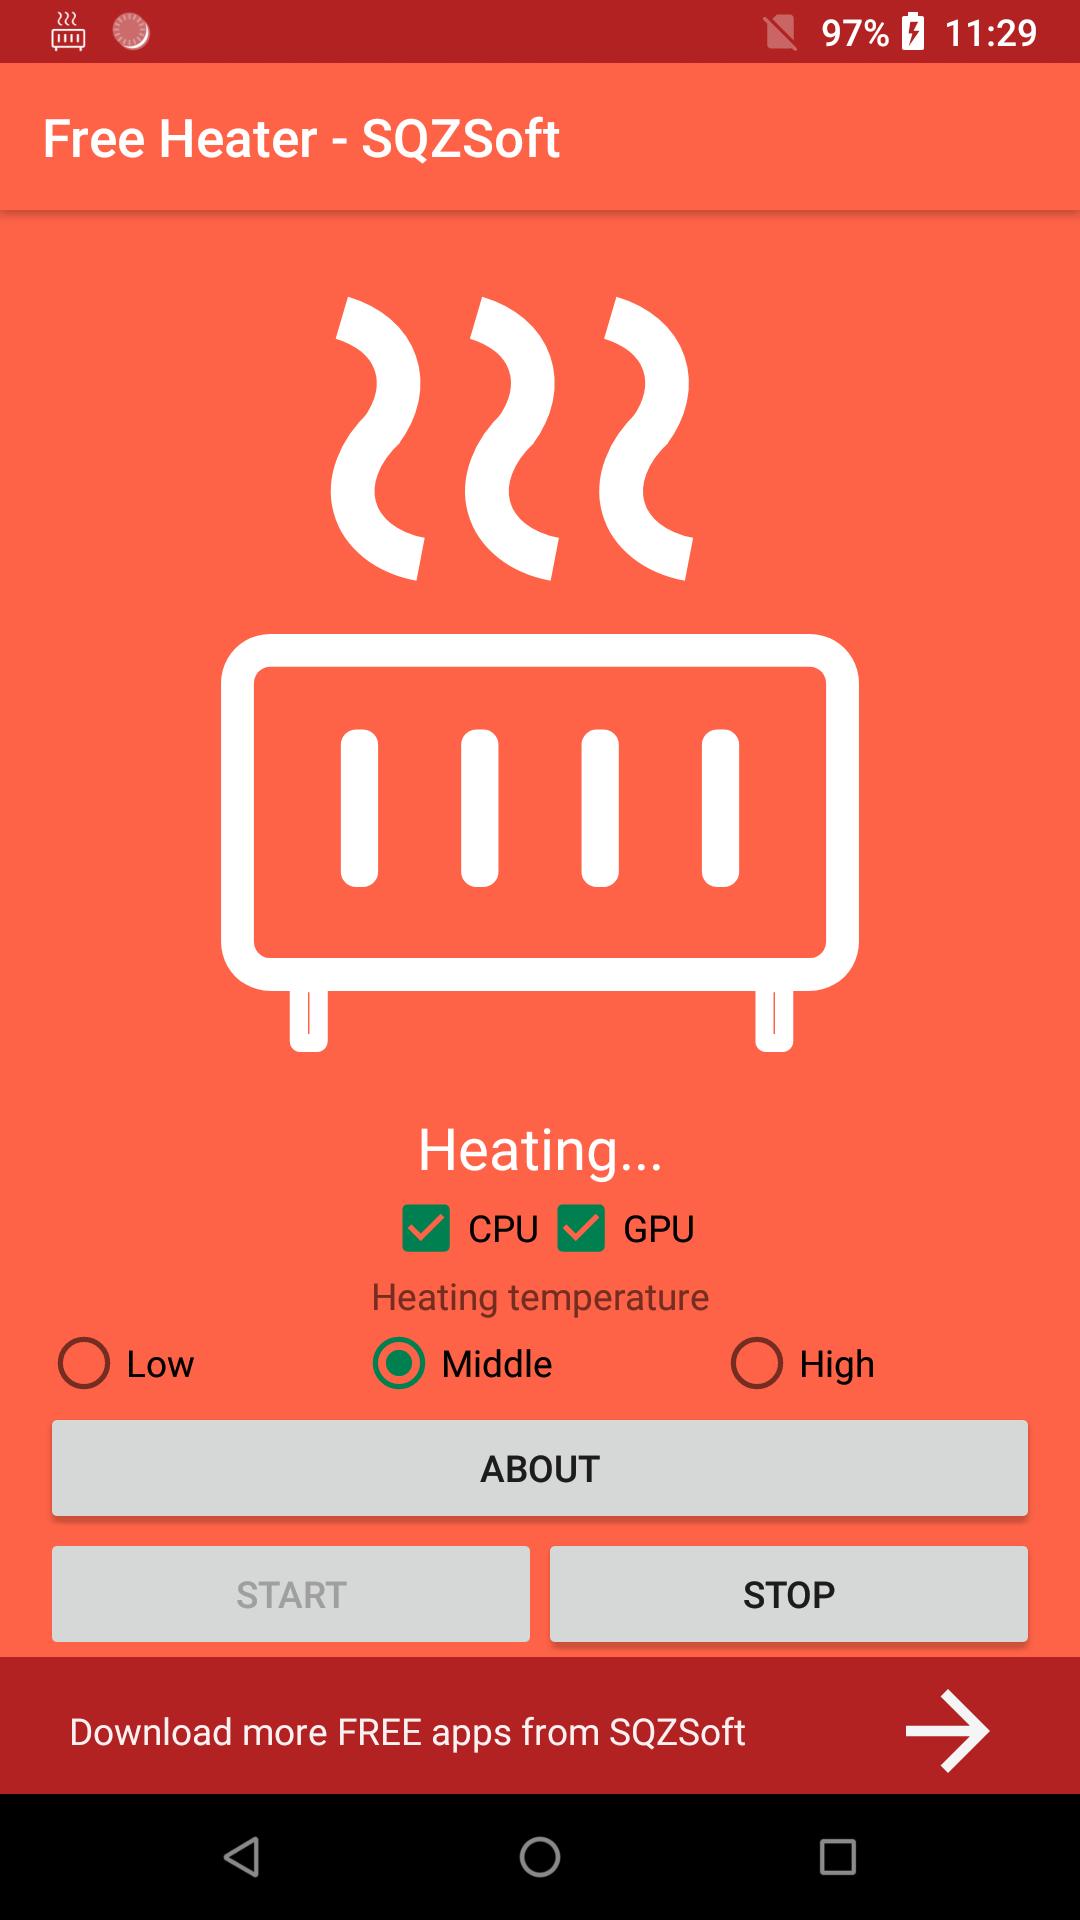 Heater - SQZSoft for Android - APK Download